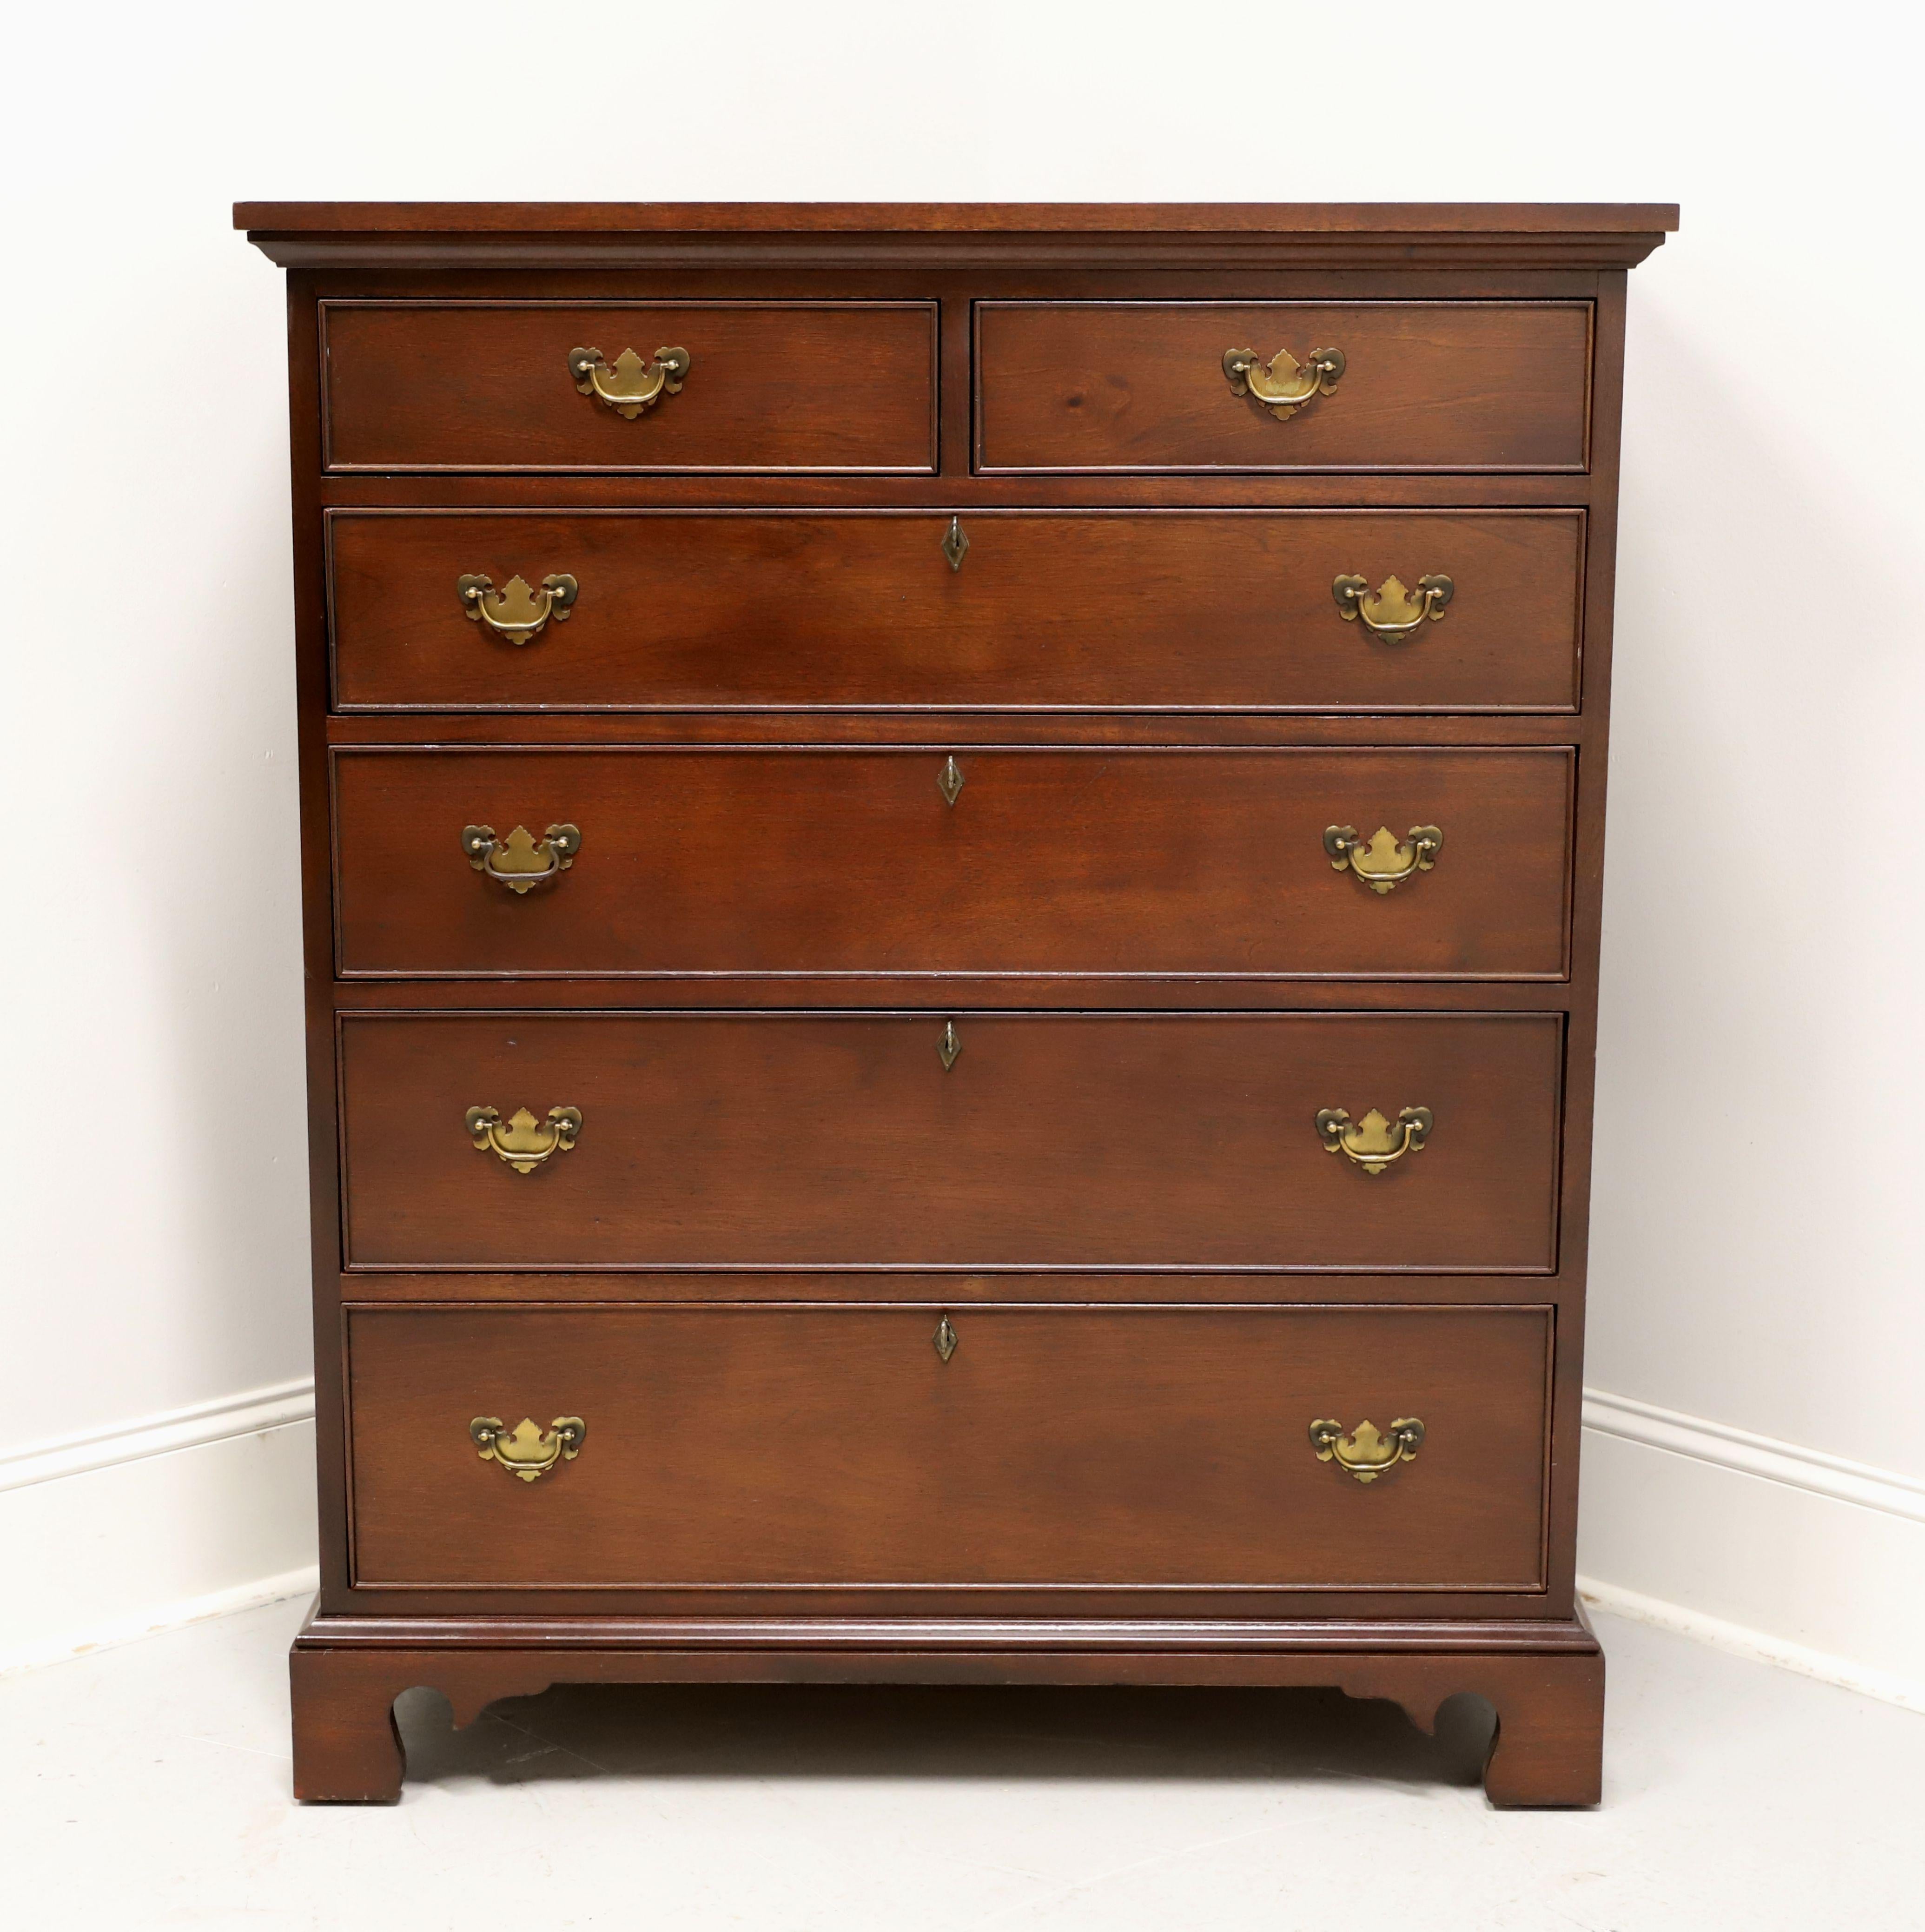 A Chippendale style chest of drawers by high-quality furniture maker Craftique. Solid mahogany with their Mellowax finish, brass hardware, miter edge to the top, brass keyhole escutcheons, and bracket feet. Features two smaller over four larger